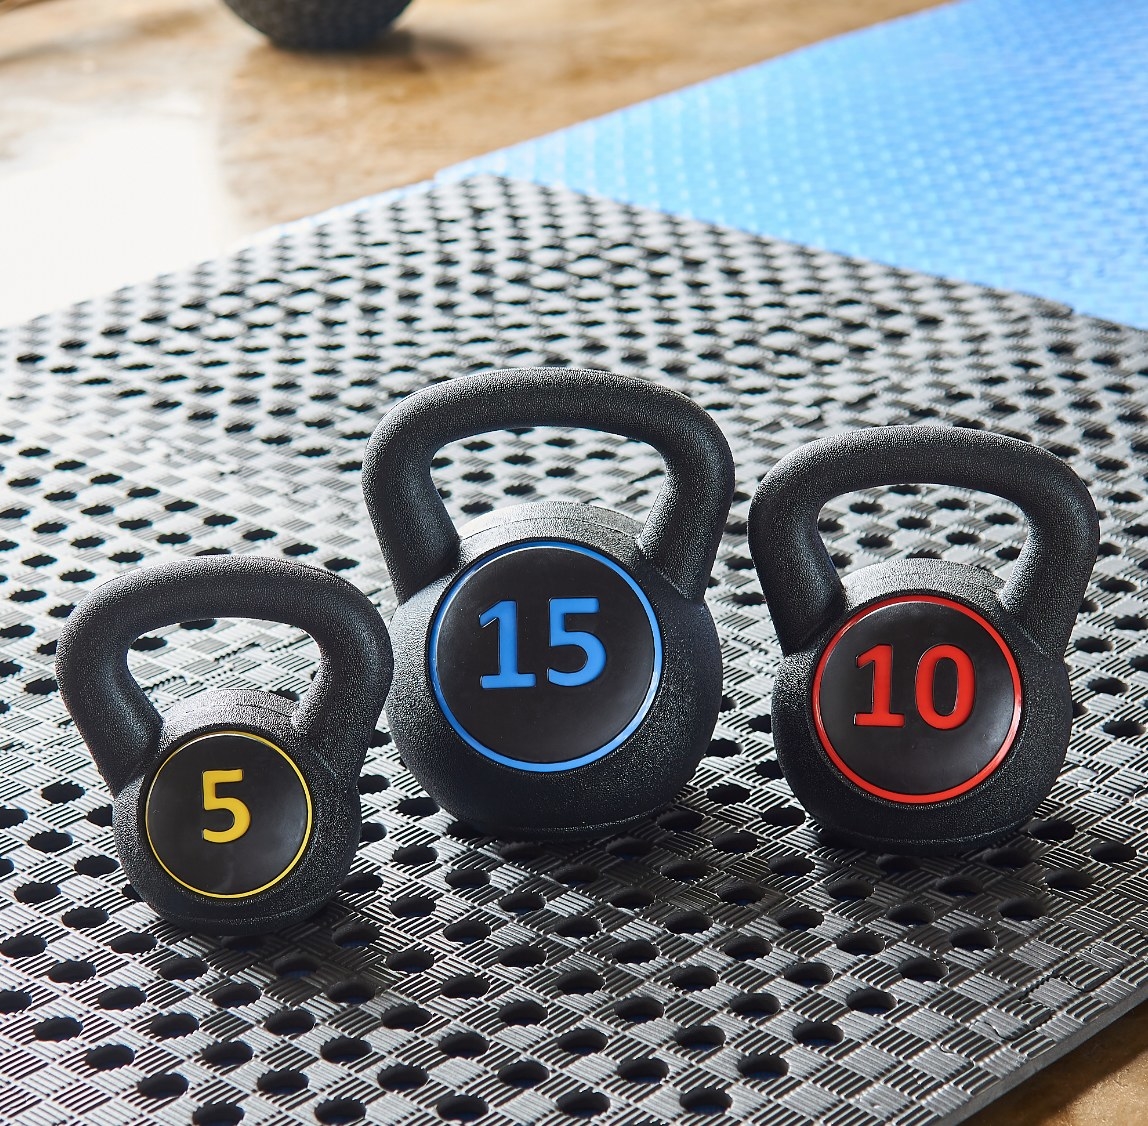 The three piece dumbbell set